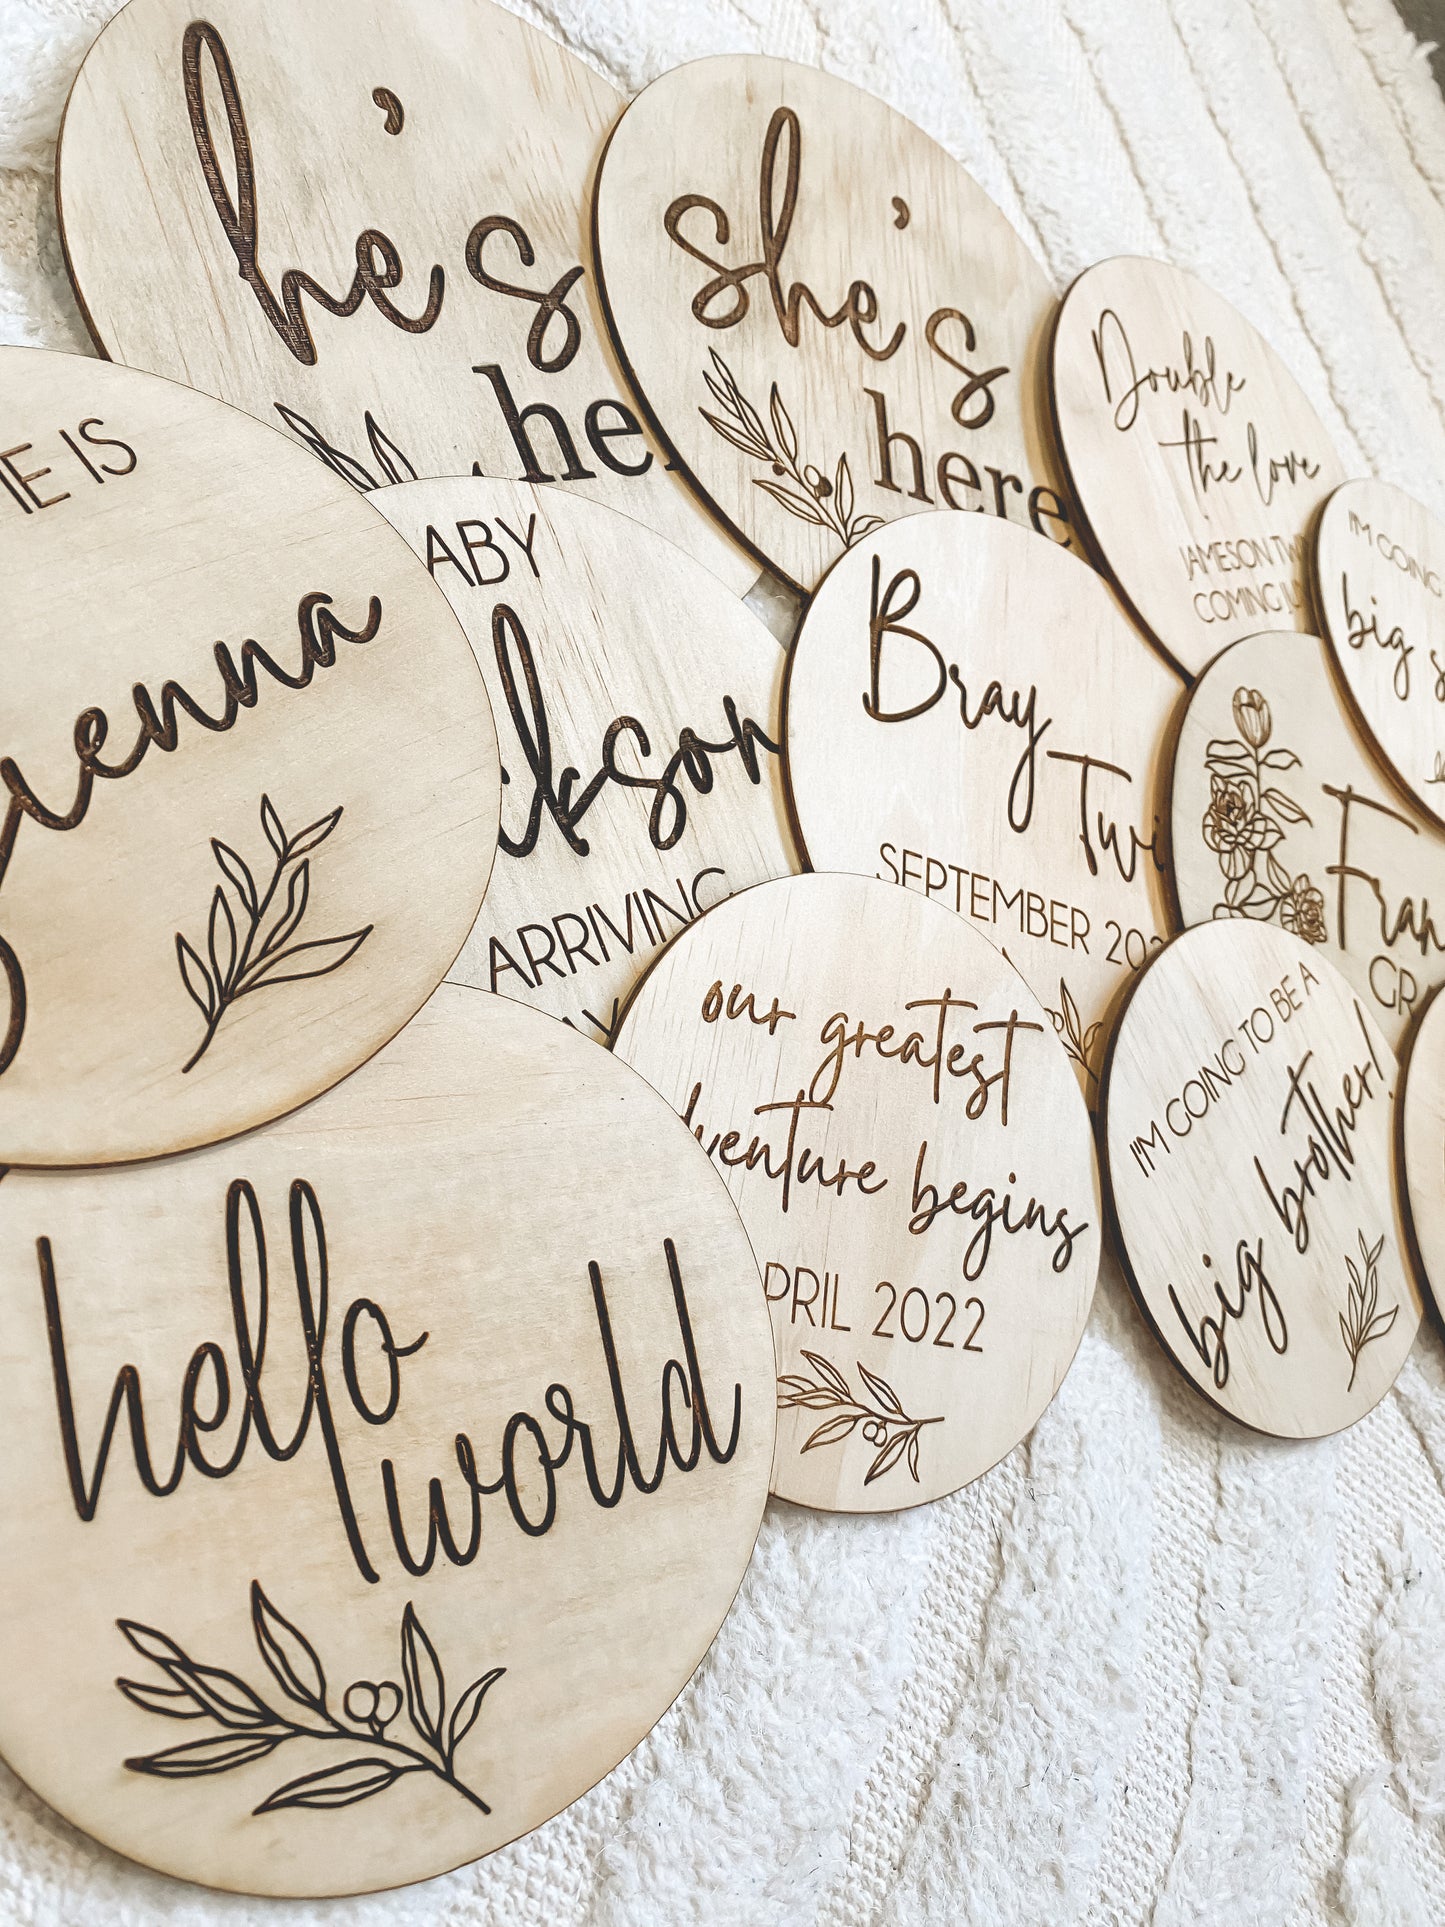 'He's/She's Here' Birth Wood Announcement Plaque